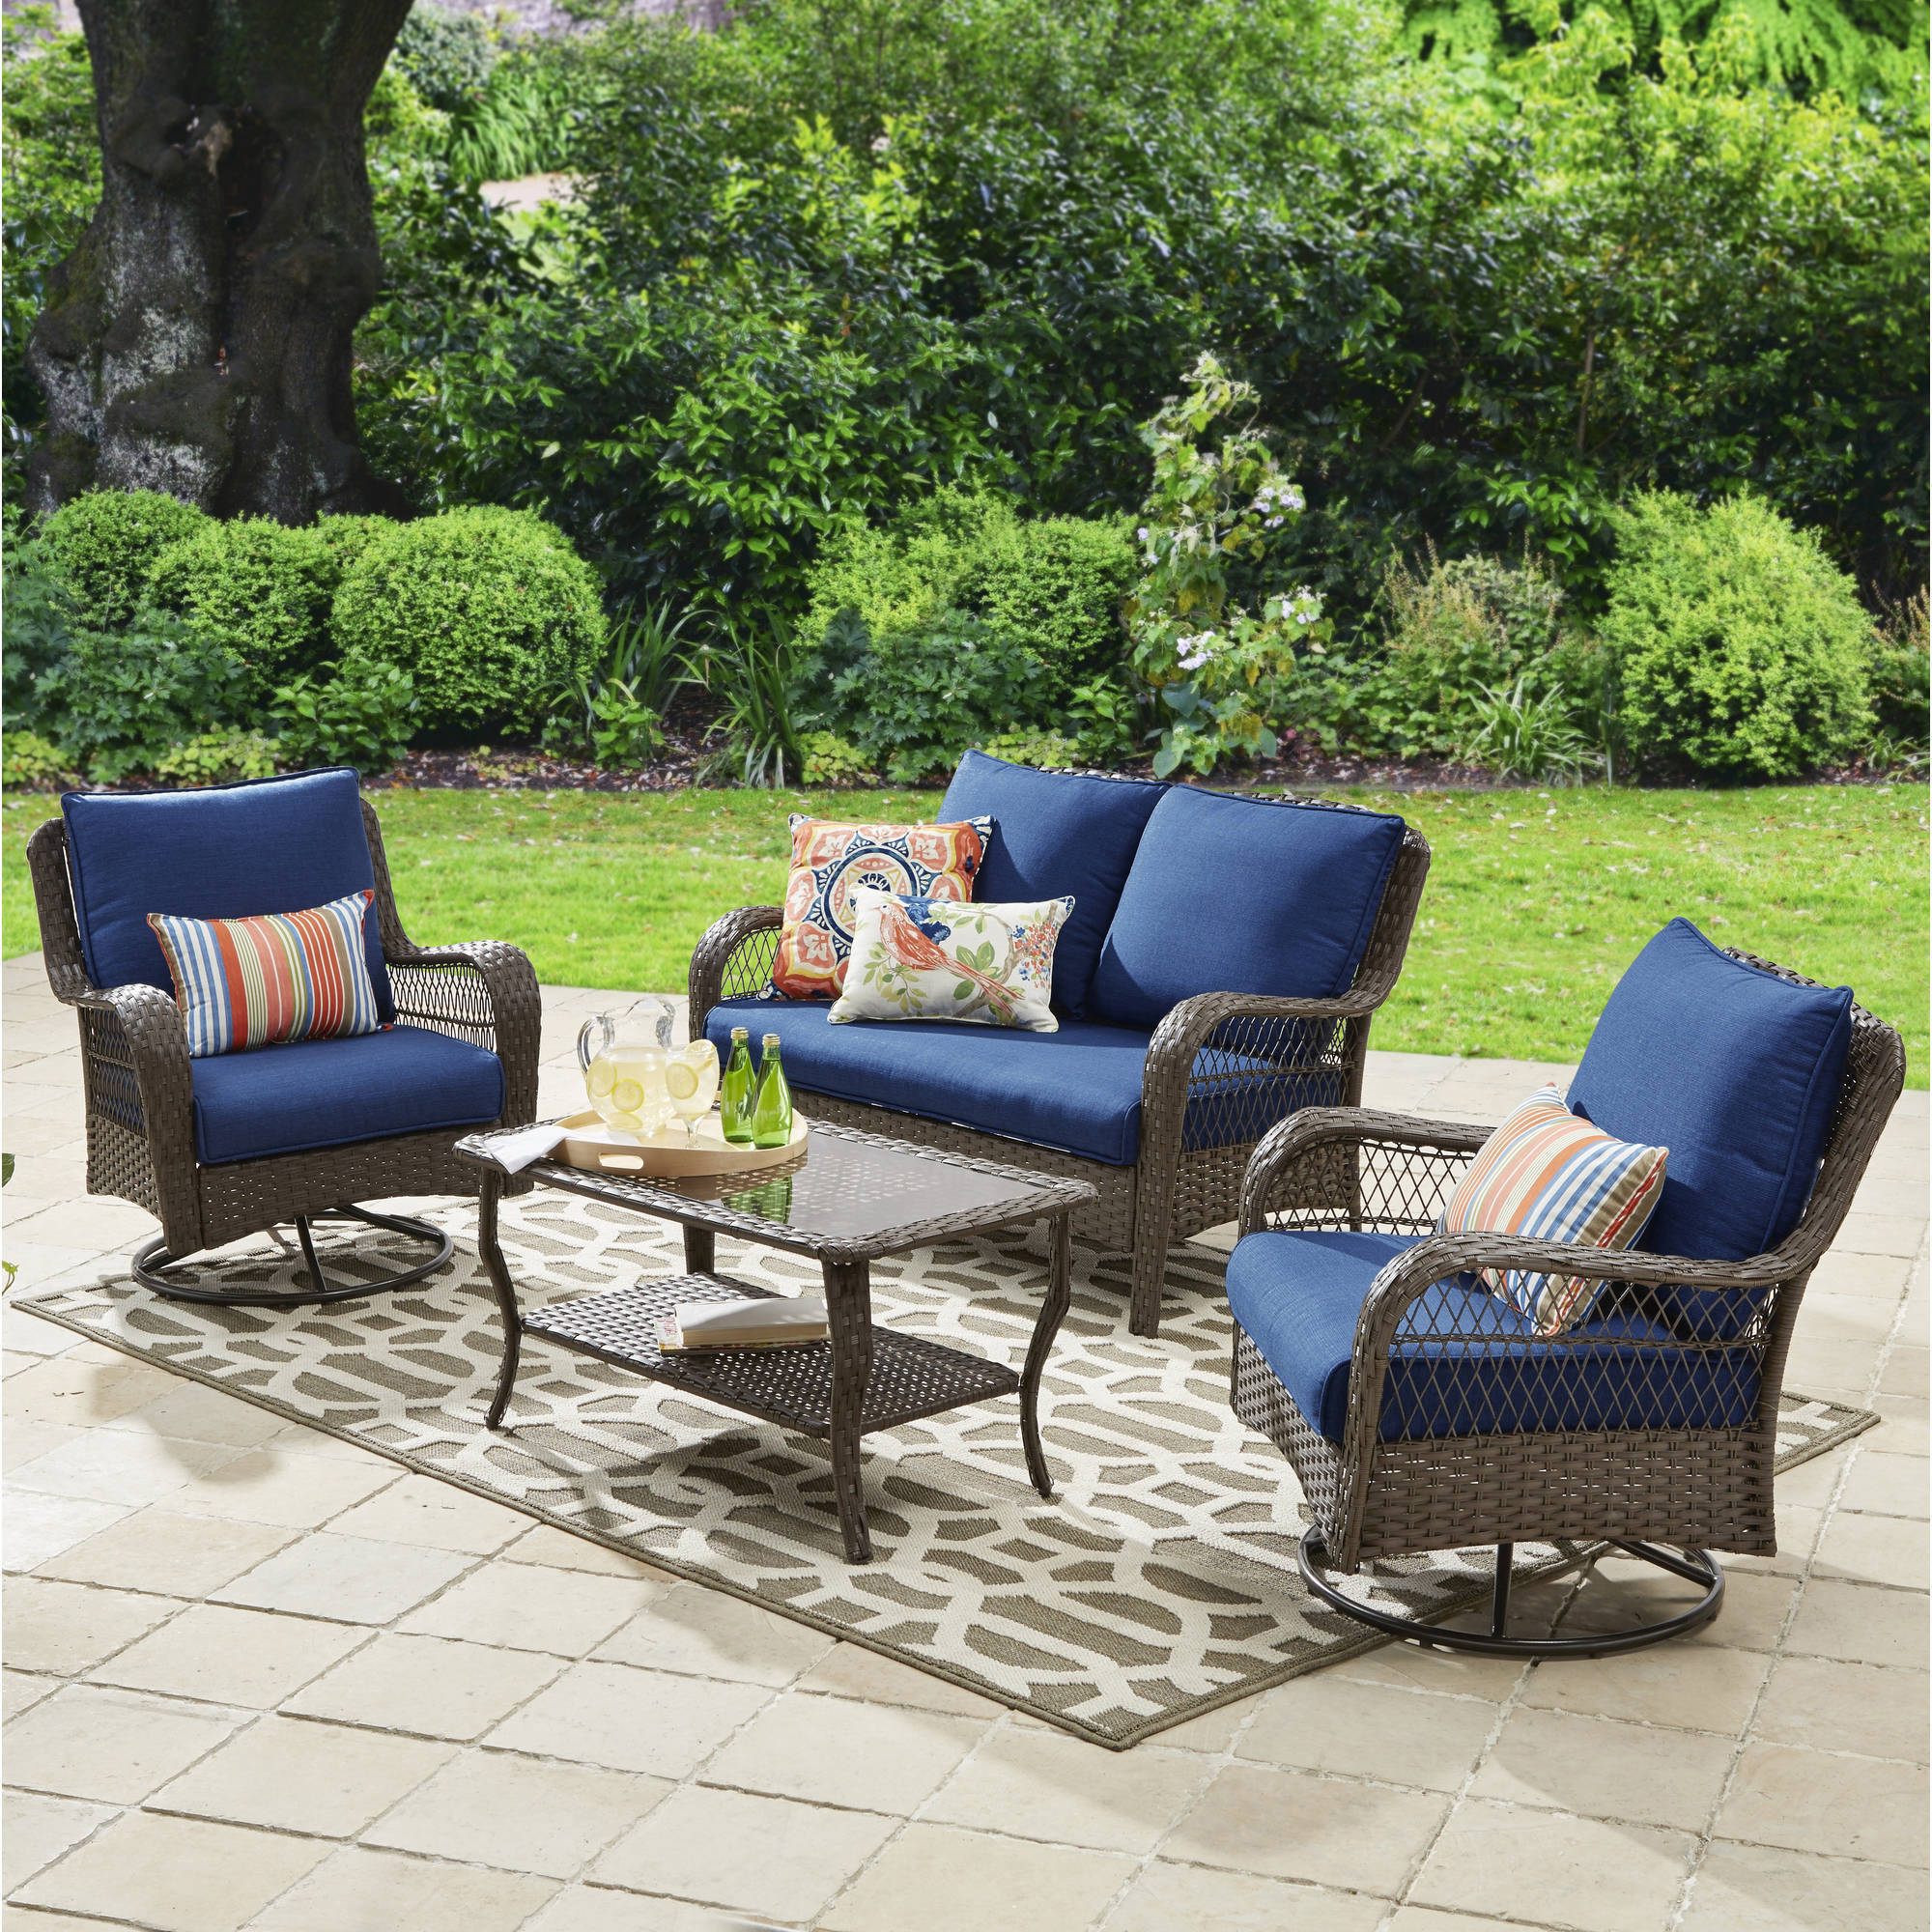 Outdoor Patio Sets For Sale ~ Patio Sectional Set 5pc Sofa Ottoman ...